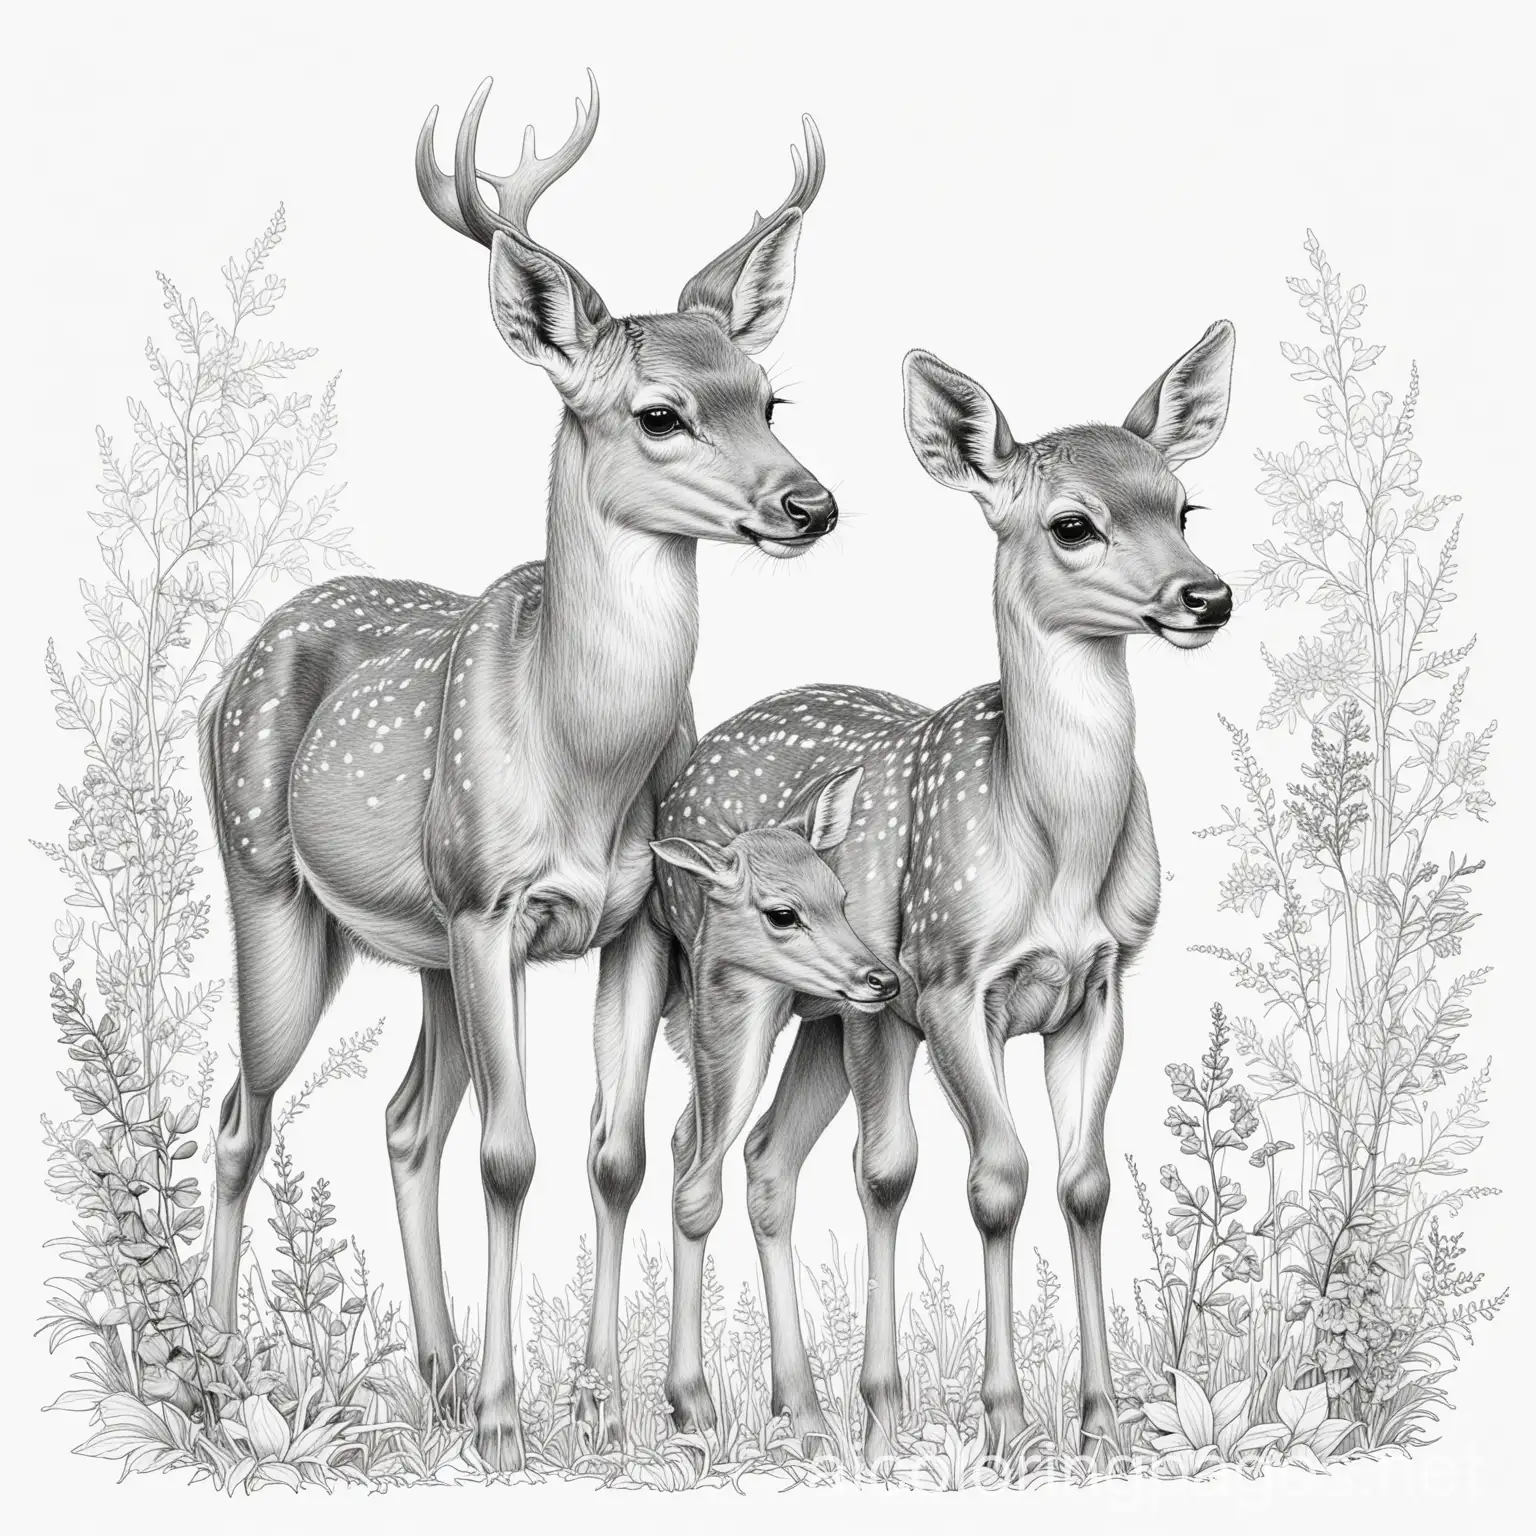 deer mother and fawn, Coloring Page, black and white, line art, white background, Simplicity, Ample White Space. The background of the coloring page is plain white to make it easy for young children to color within the lines. The outlines of all the subjects are easy to distinguish, making it simple for kids to color without too much difficulty